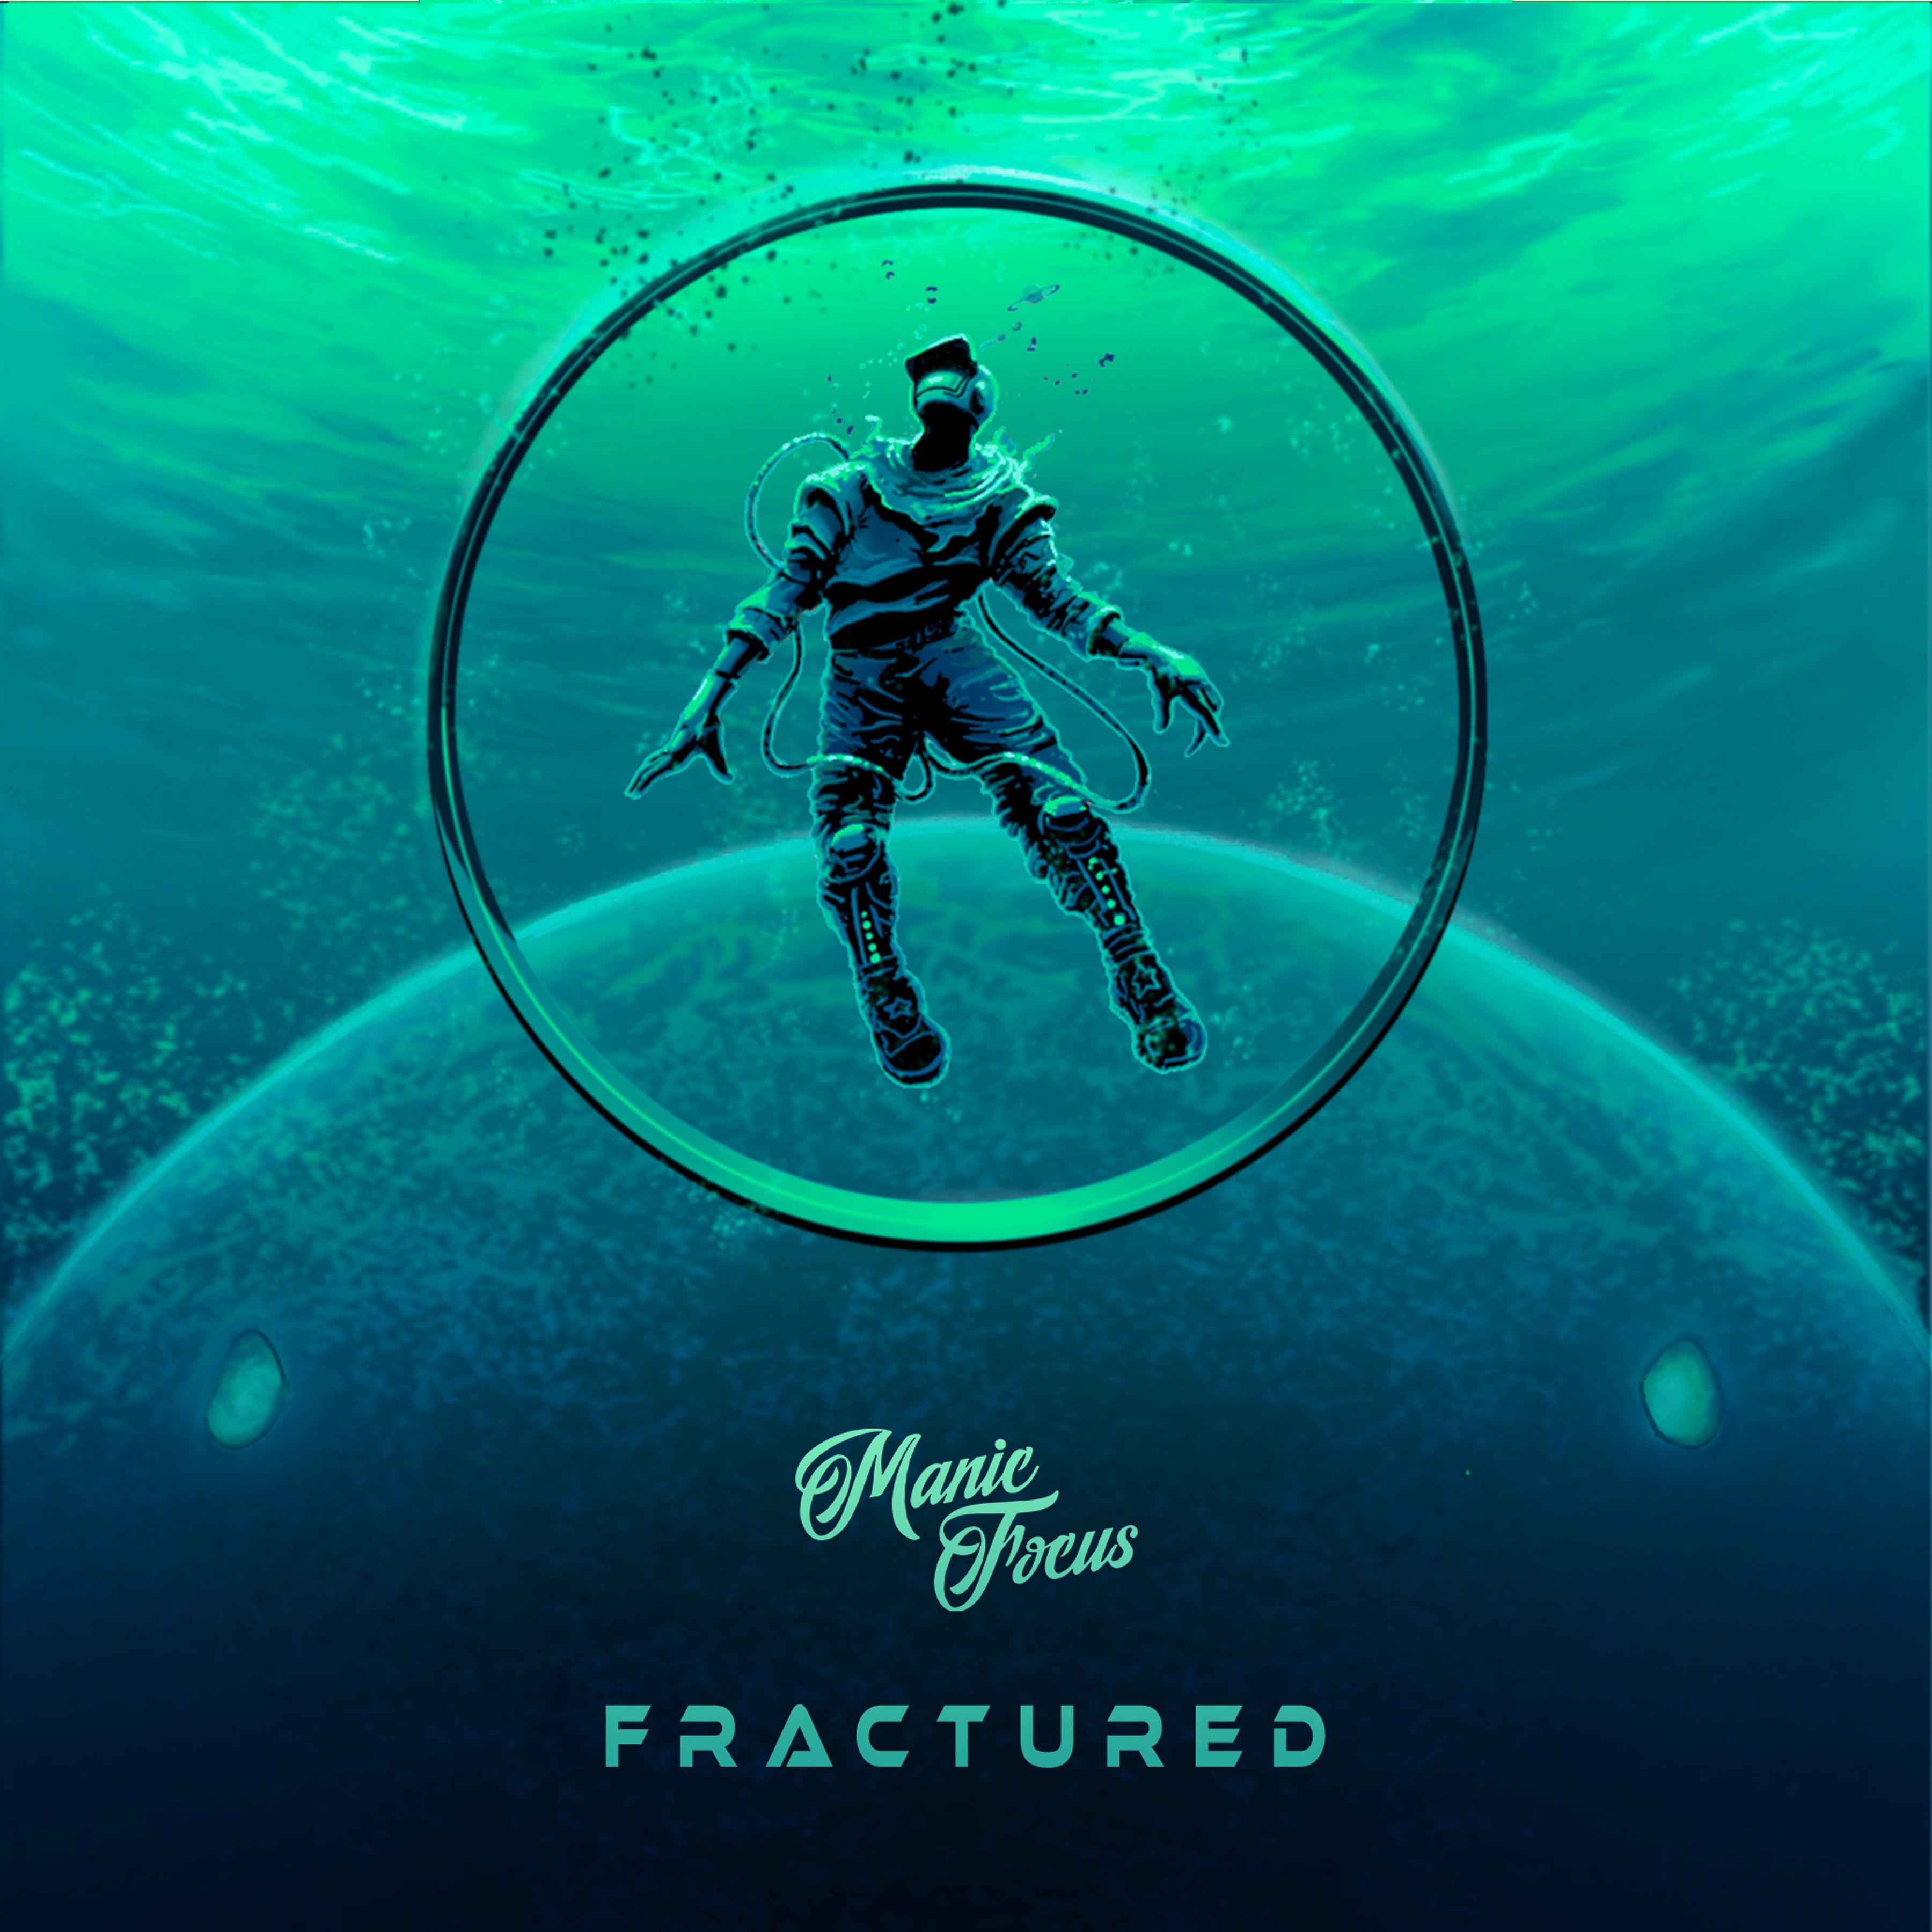 MANIC FOCUS RELEASES NEW SINGLE ‘FRACTURED’